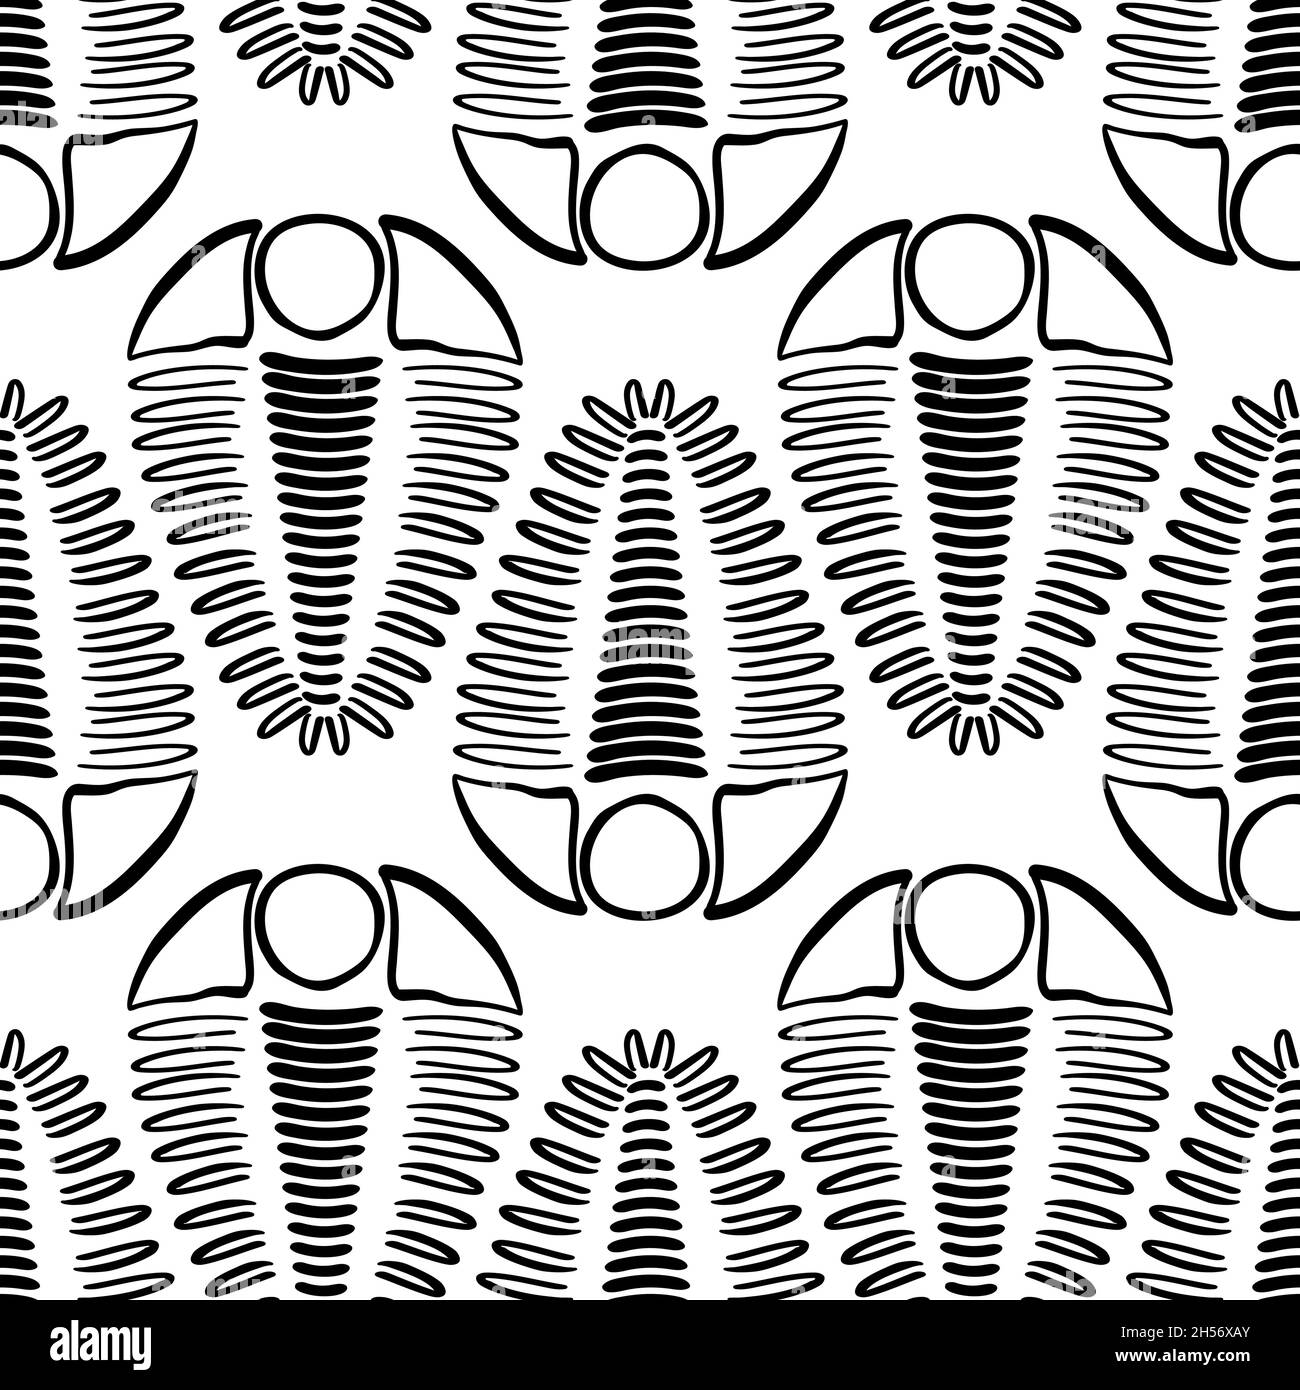 Trilobite Vector Seamless Pattern Background Hand Drawn Arthropod Ribbed Shell Marine Fossils 